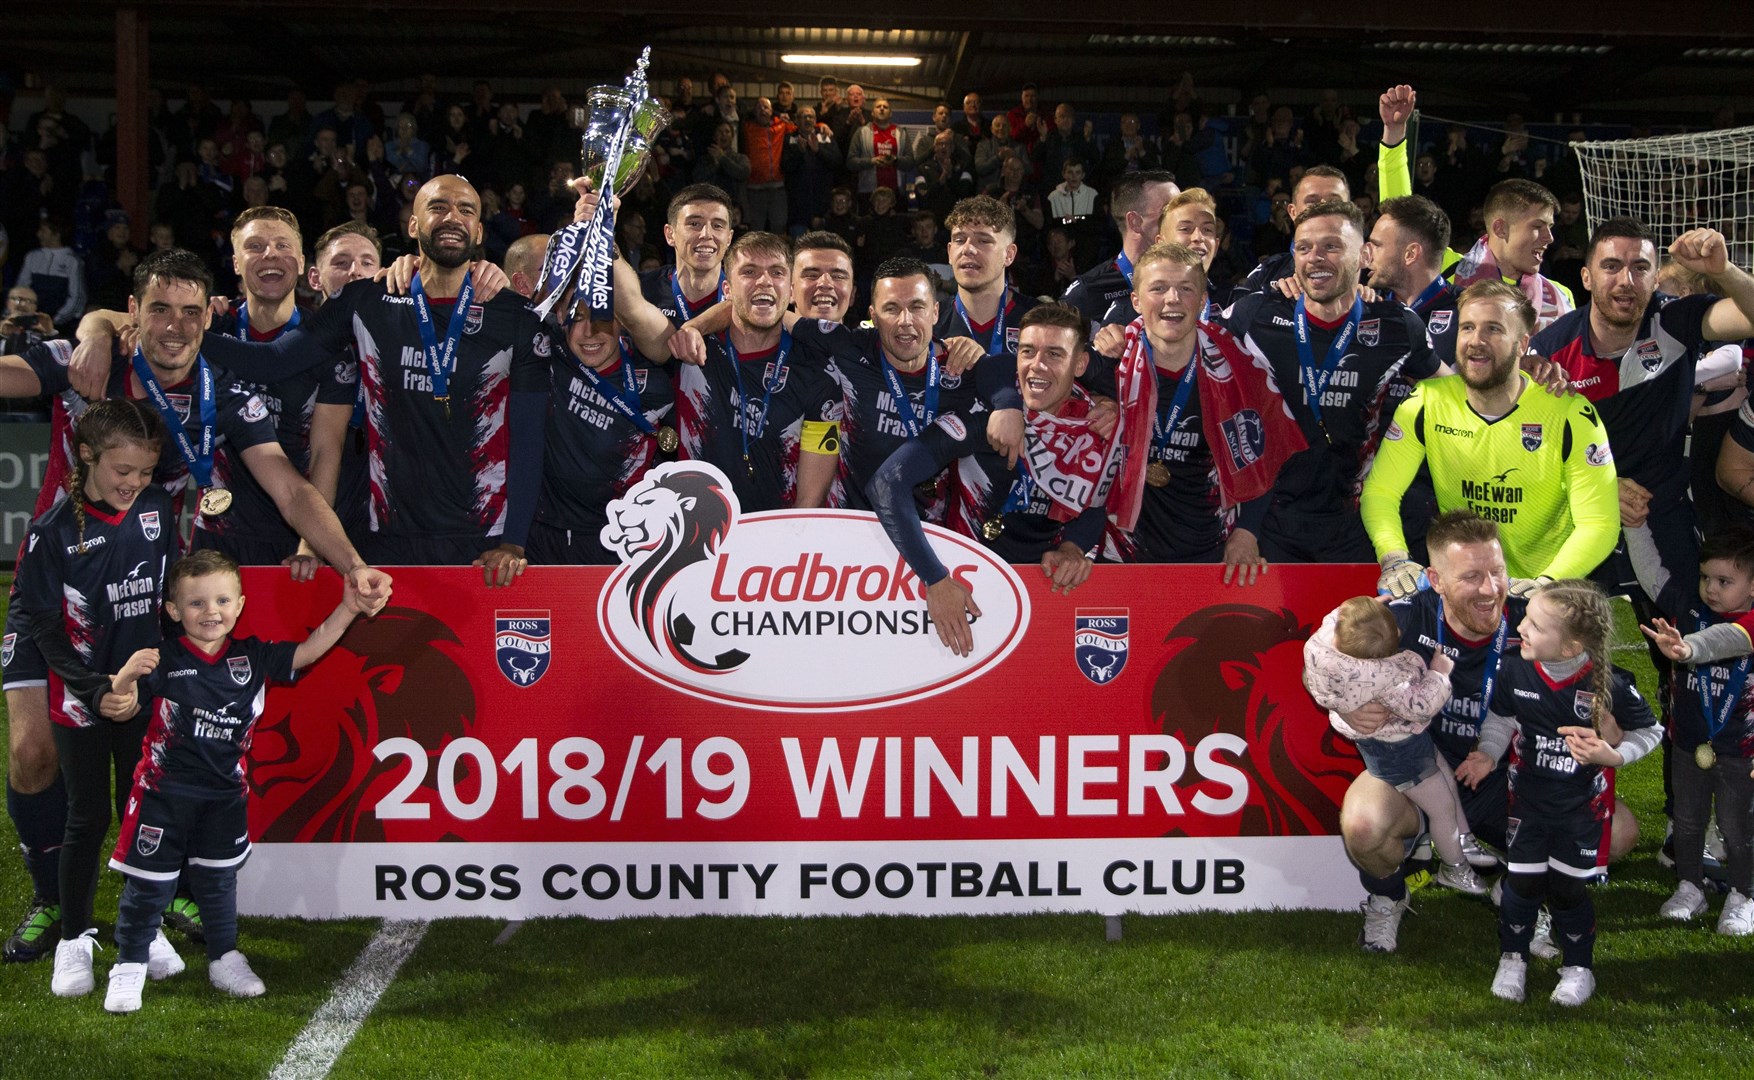 Ross County received over £400,000.